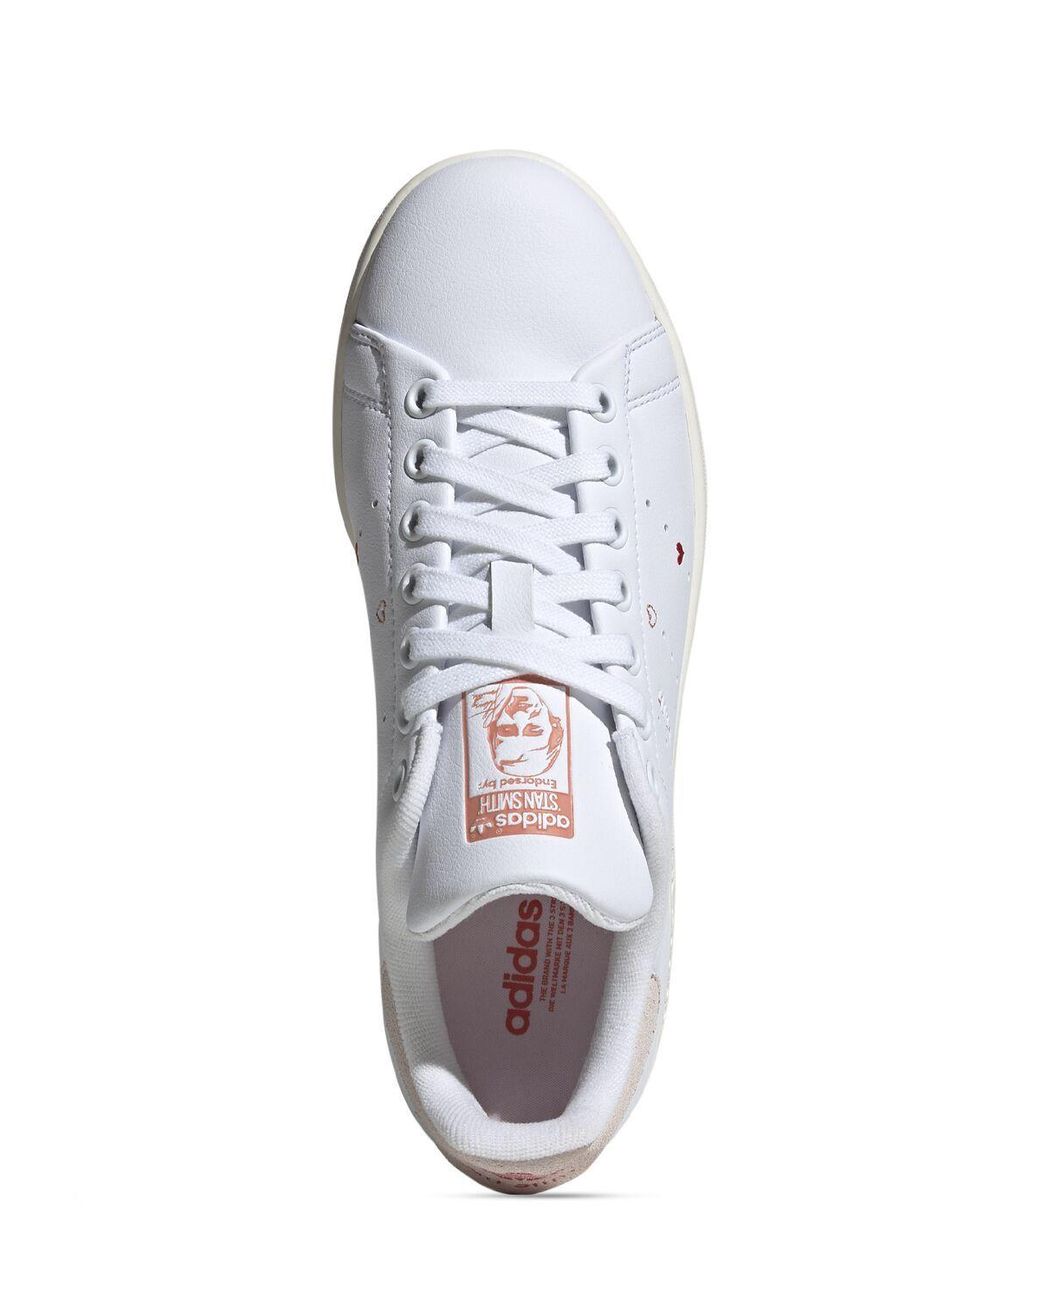 adidas Originals Stan Smith Sneakers in White | Lyst